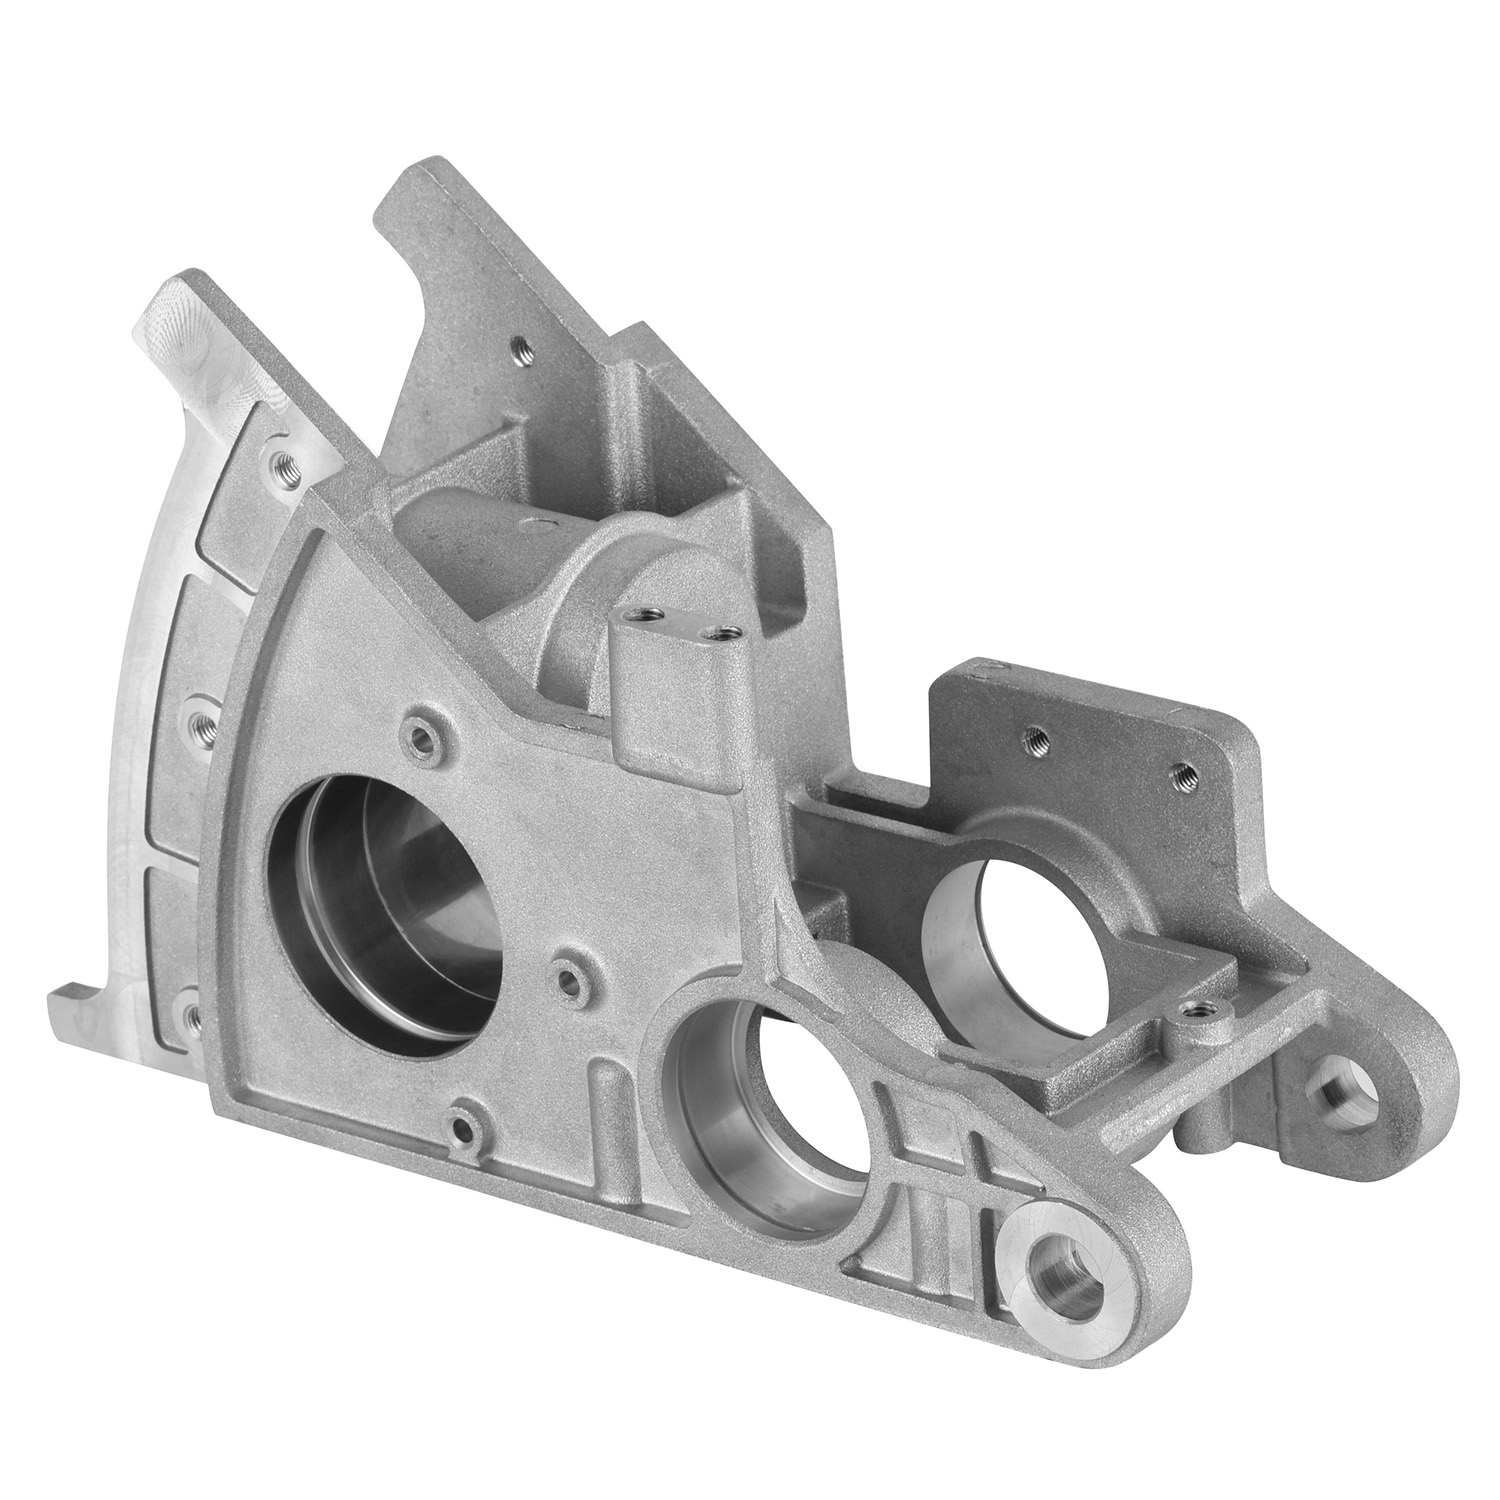 041.Aluminum Alloy Die Casting Knead and knock Case YL102-2022-08-09